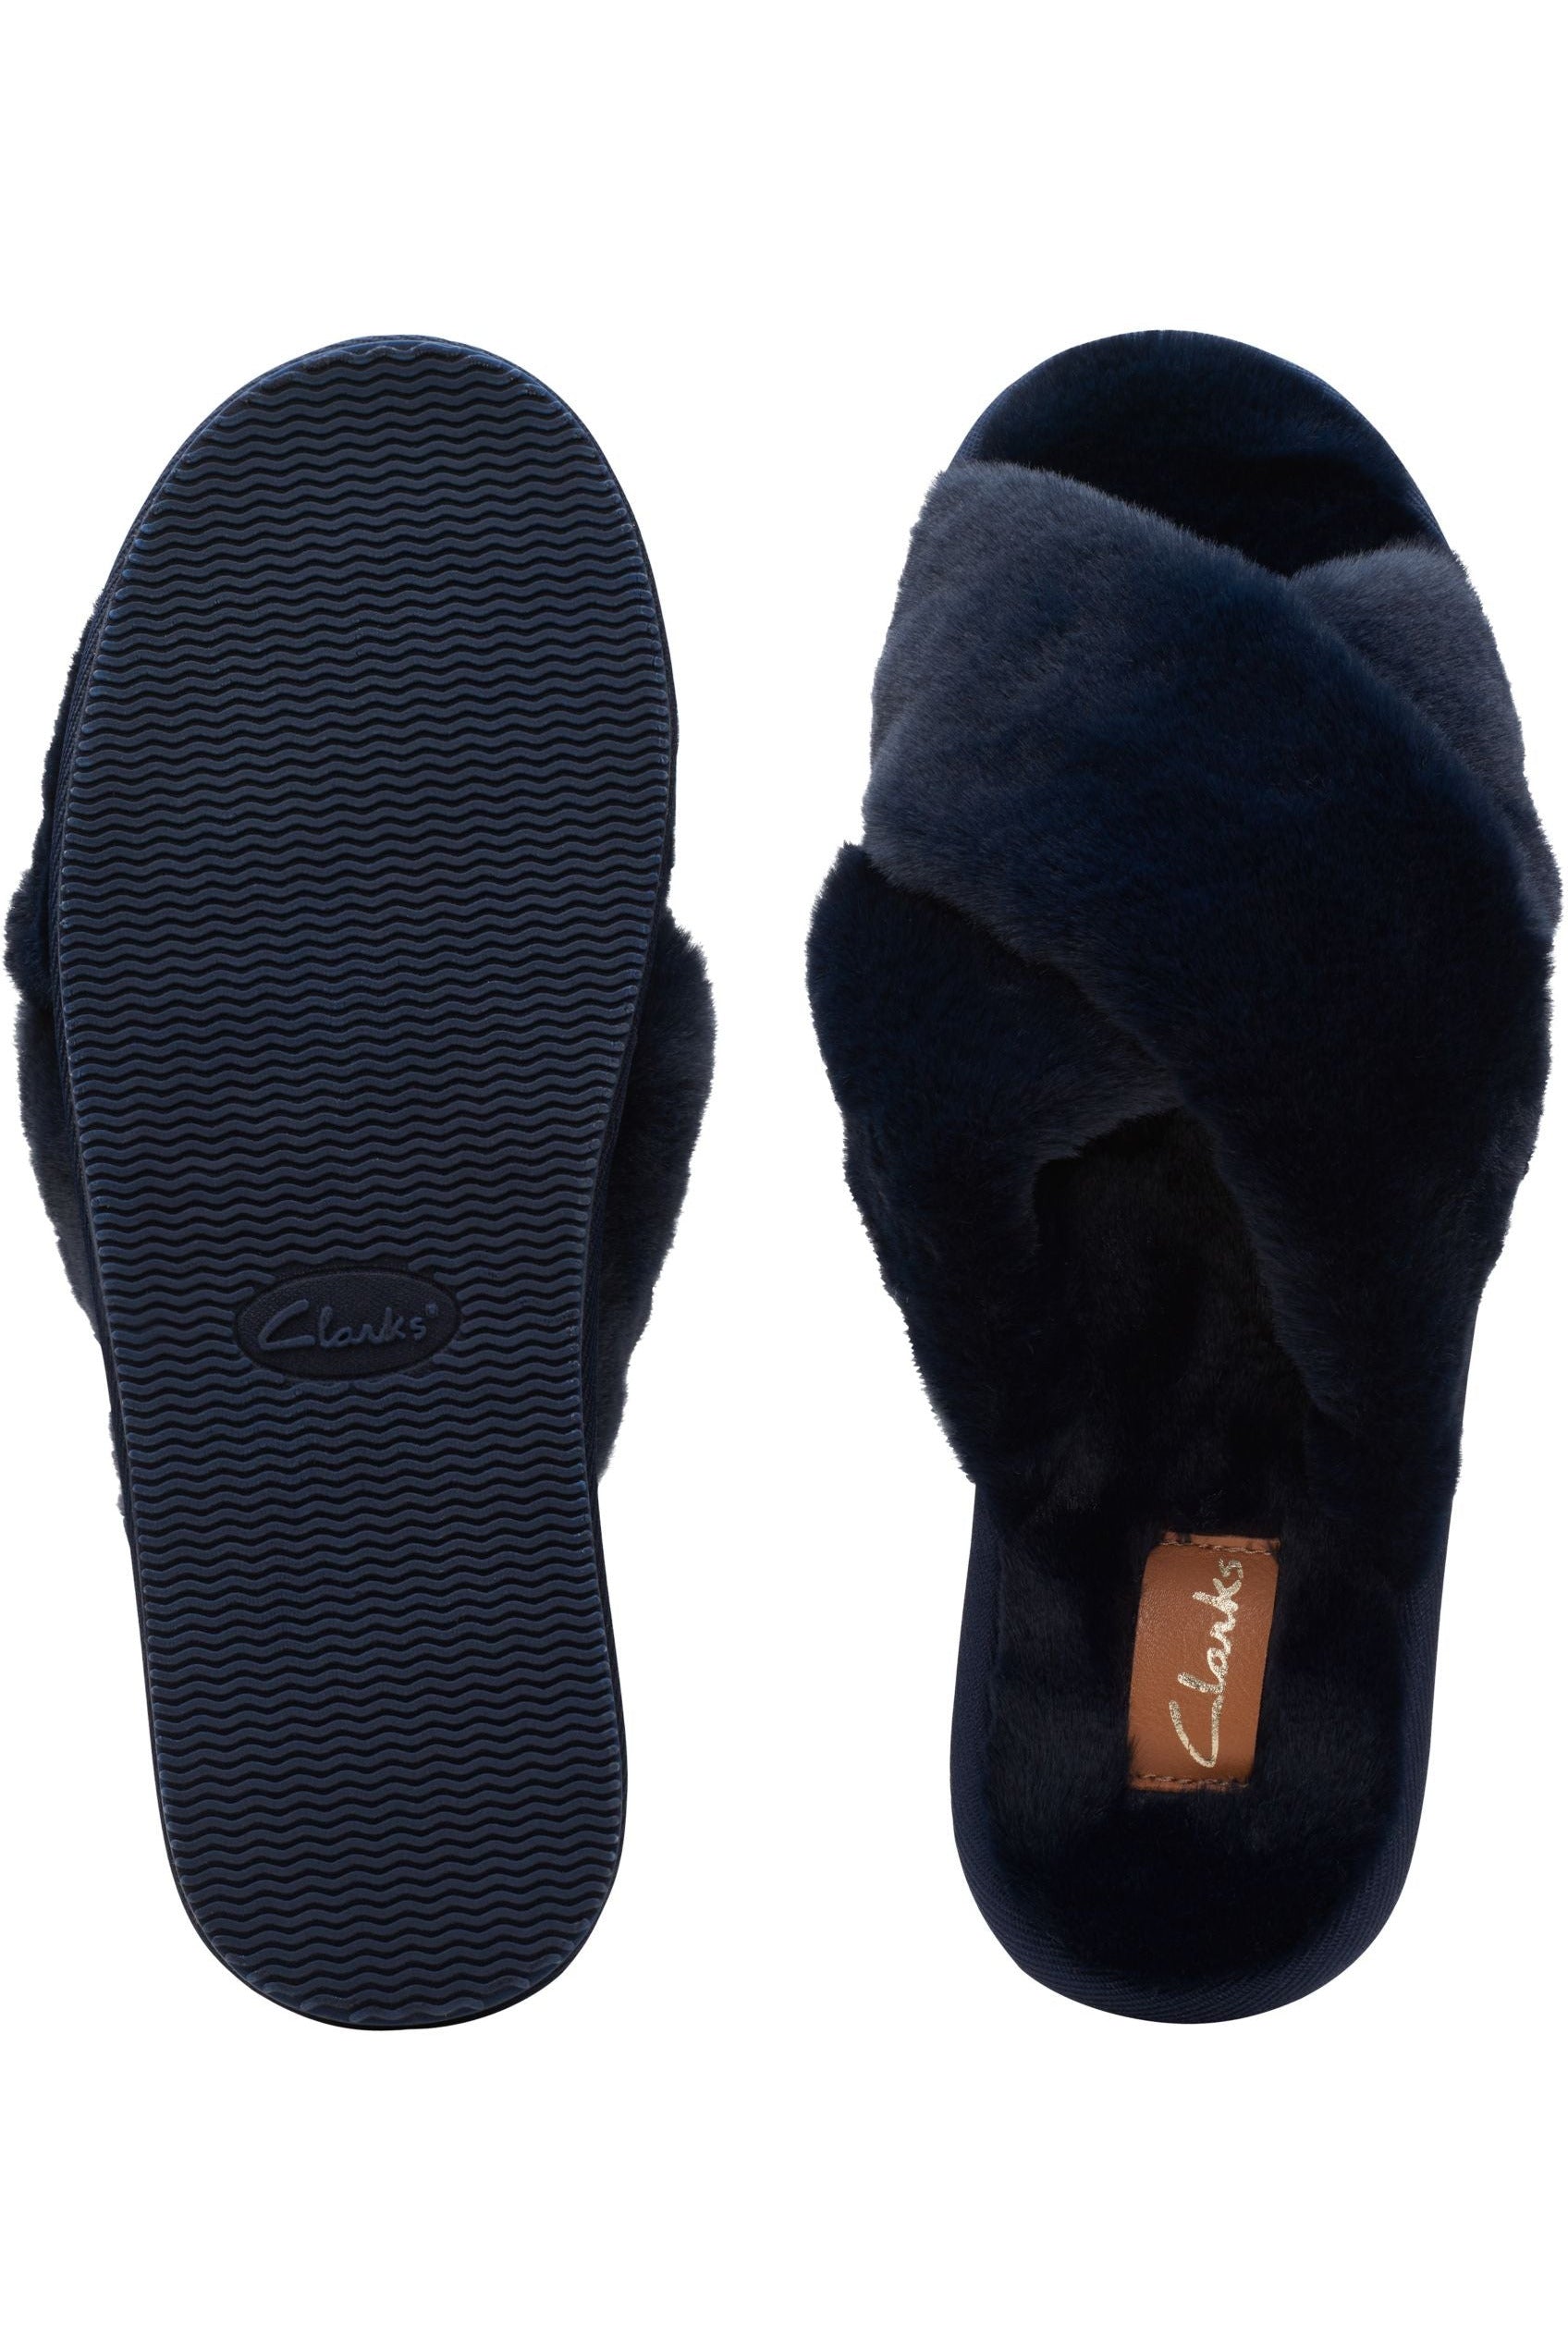 Clarks Womens Slippers Dream Lux navy